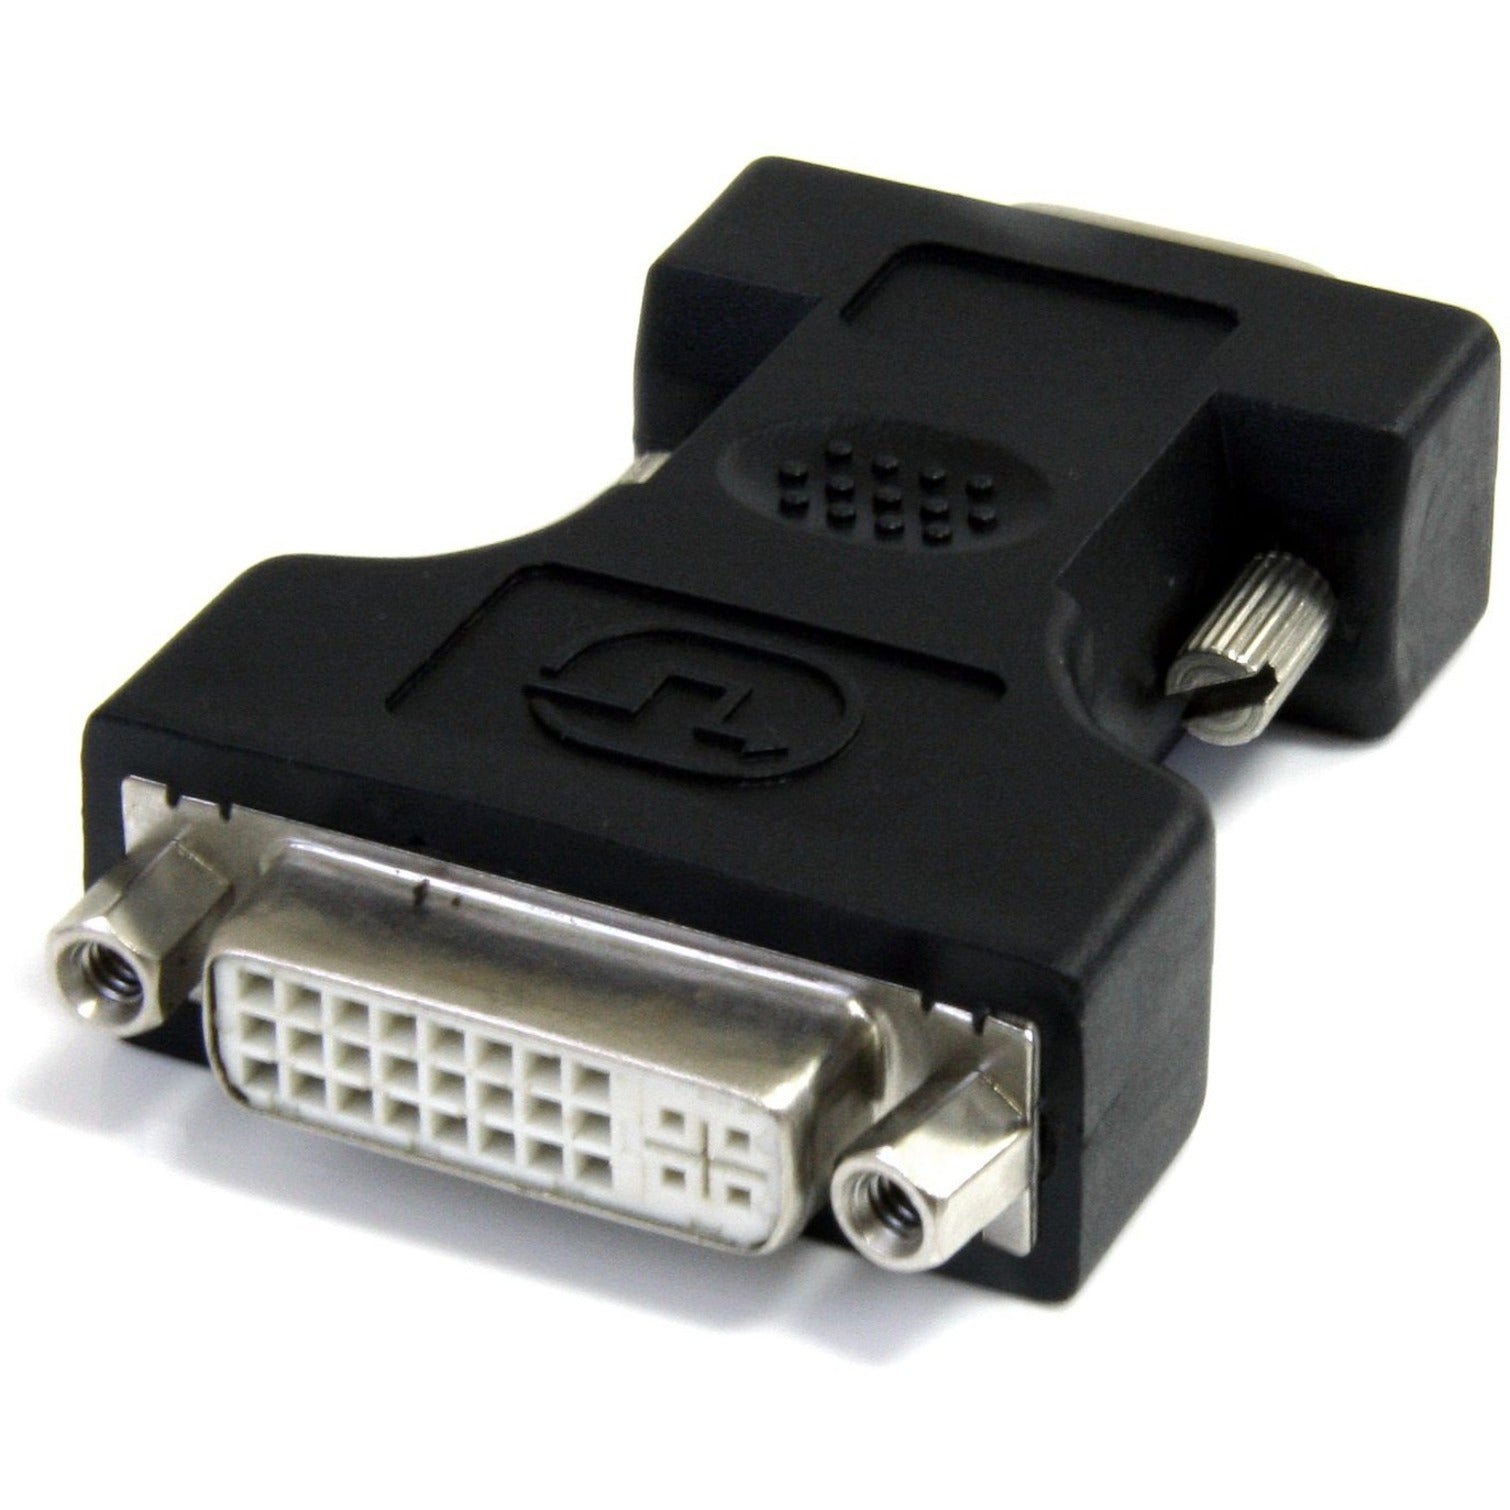 StarTech.com DVIVGAFMBK DVI to VGA Cable Adapter - Black, Male to Female